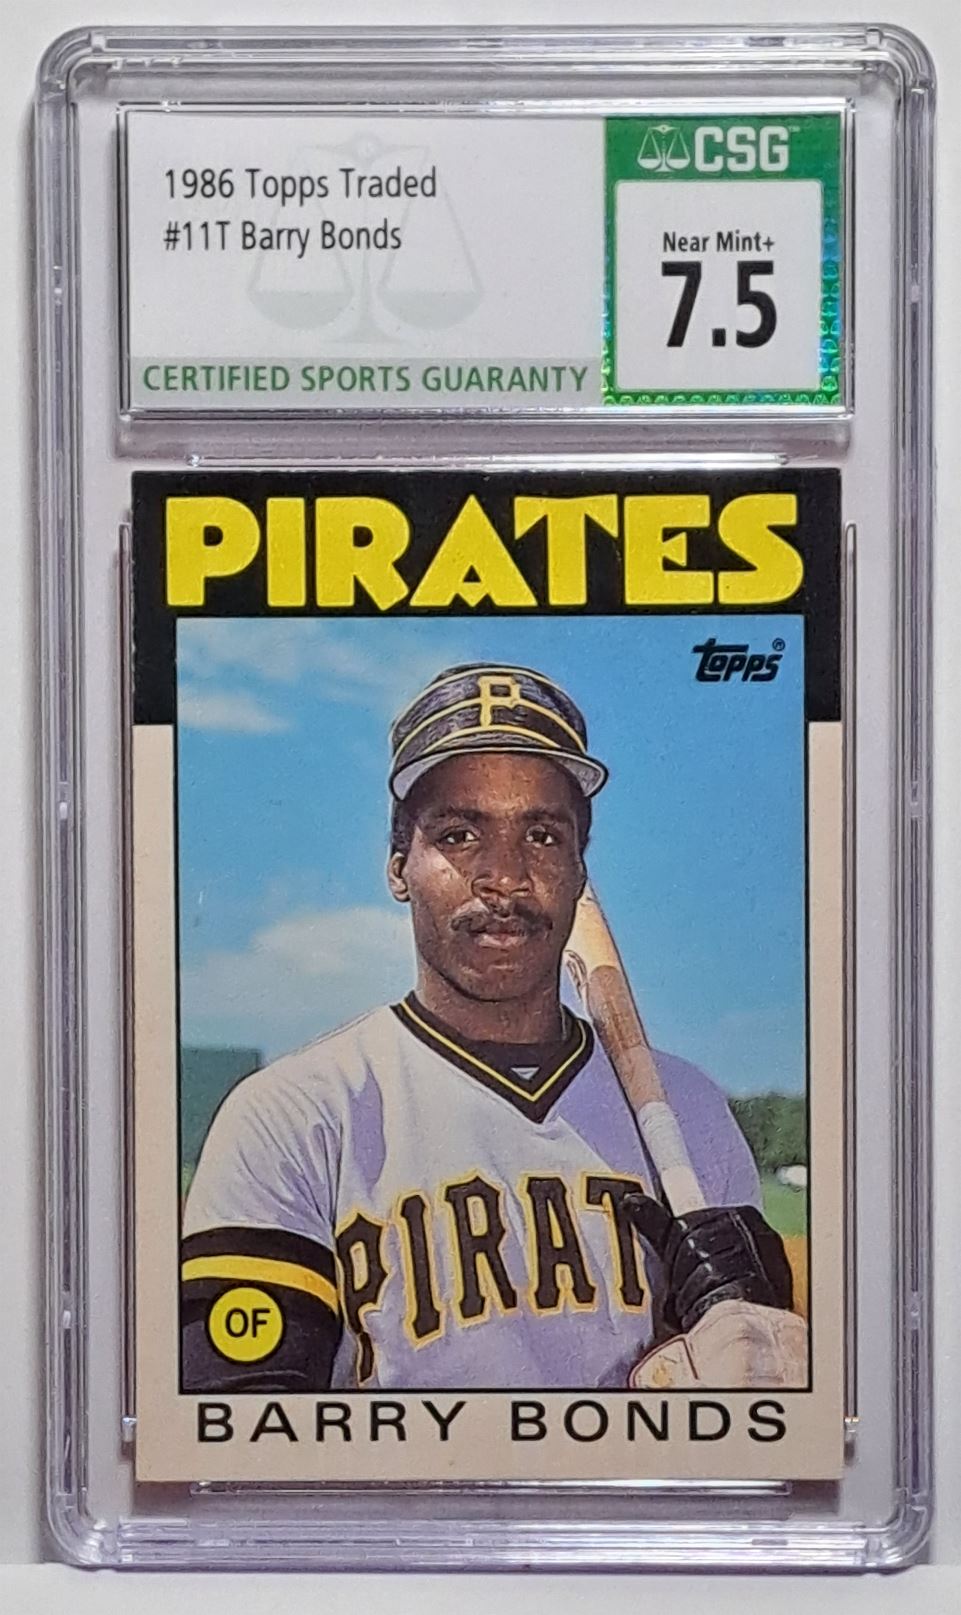 1986 Topps Traded Barry Bonds #11T card front image